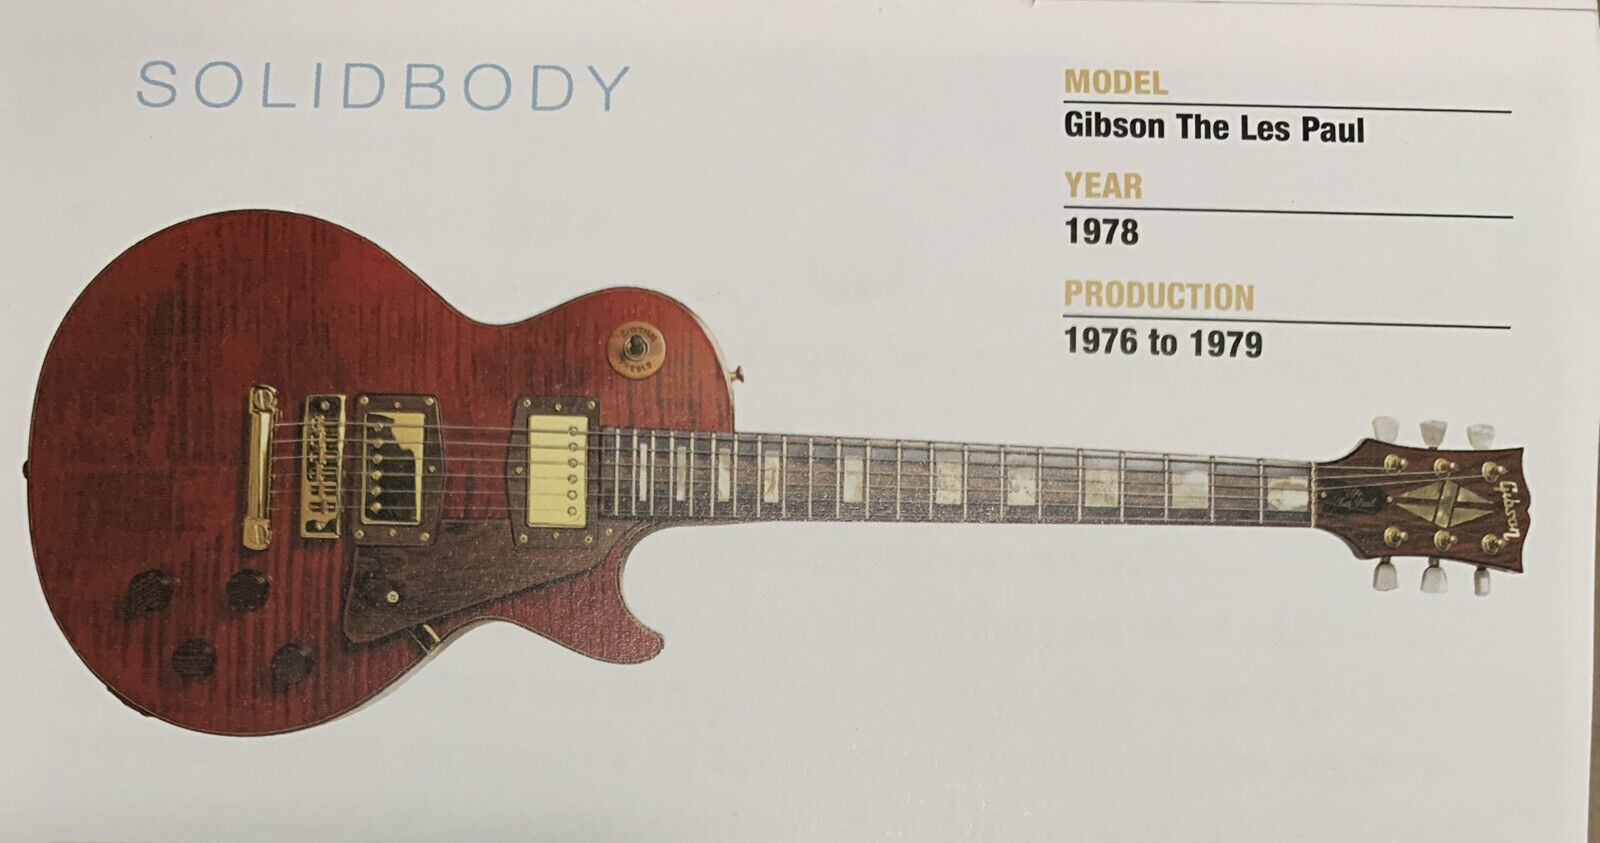 1978 Gibson The Les Paul Solid Body Guitar Fridge Magnet 5.25"x2.75" NEW - $3.84